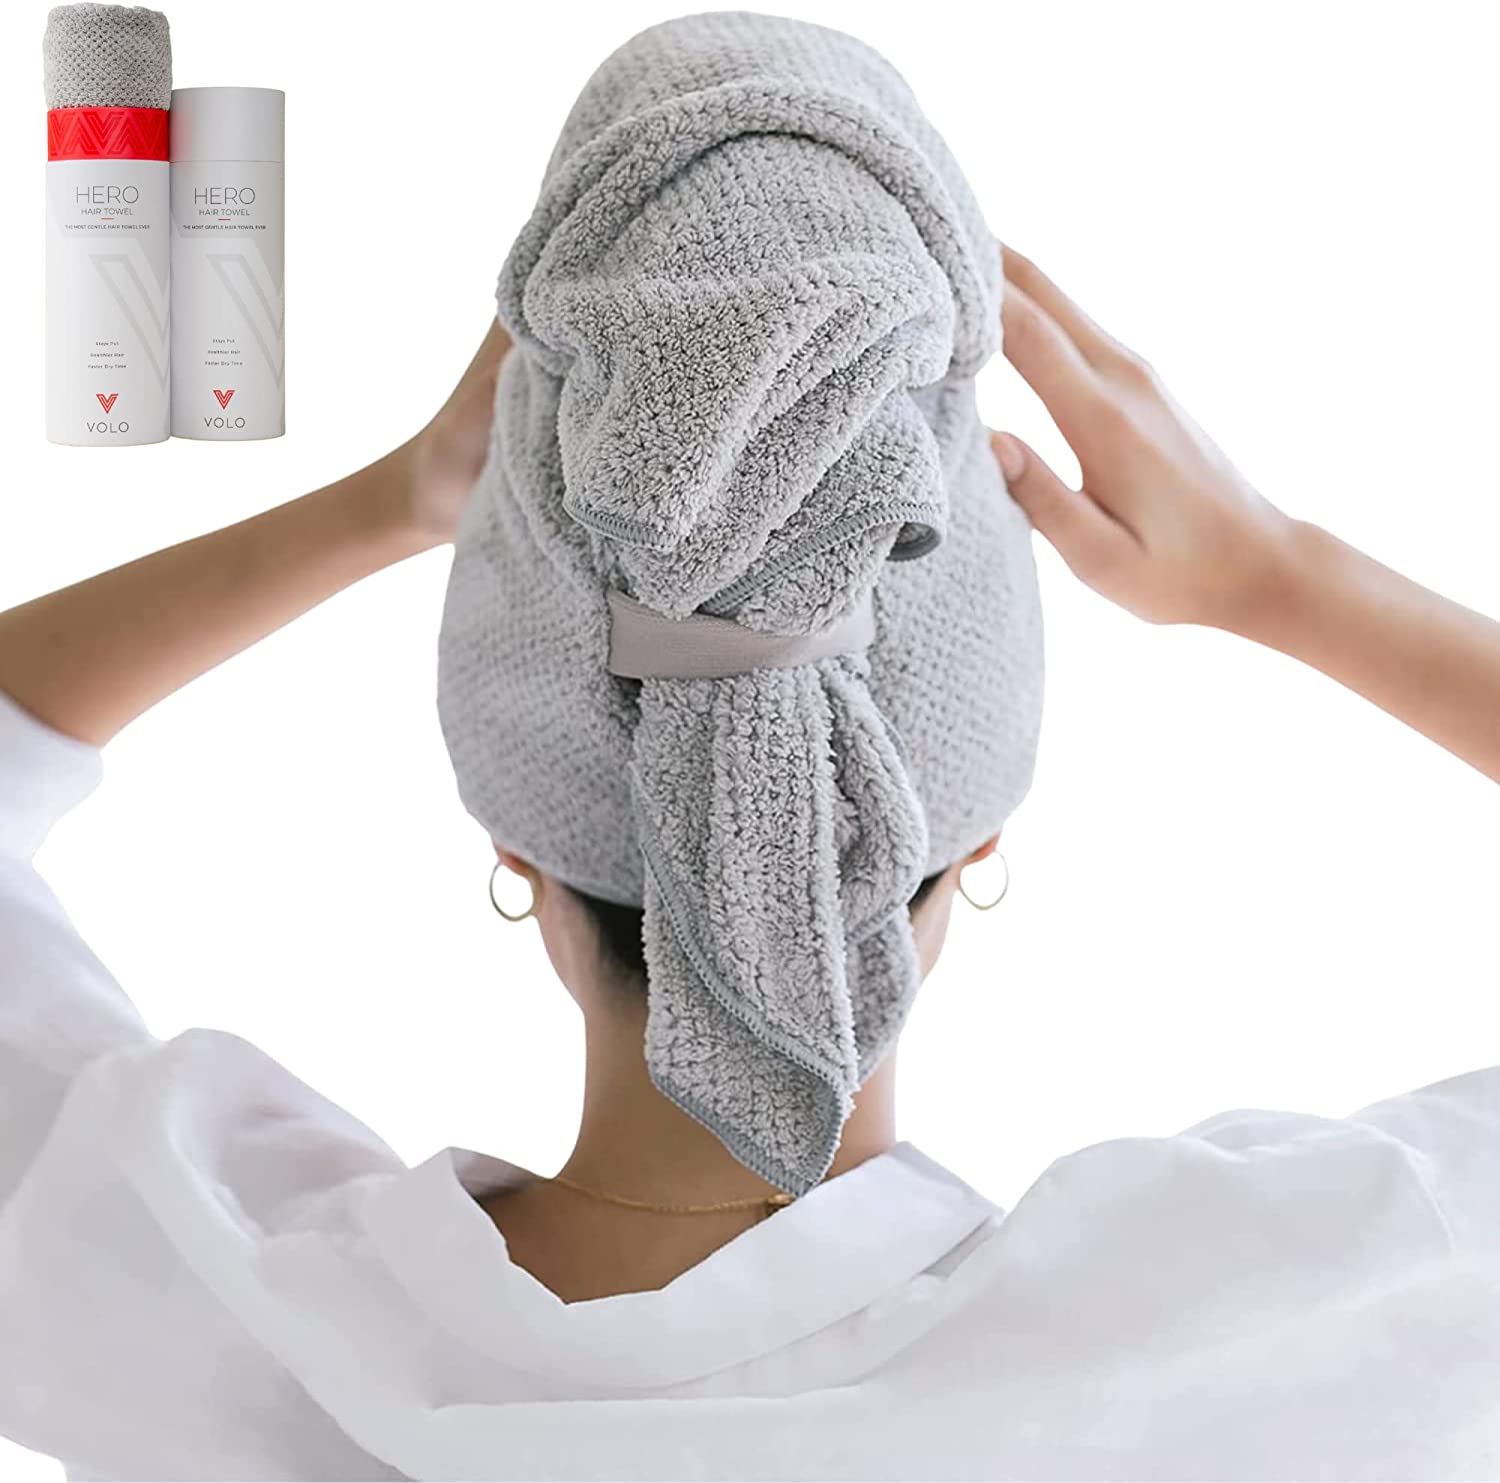 Volo hair towel - a great Christmas wish list gift for her!